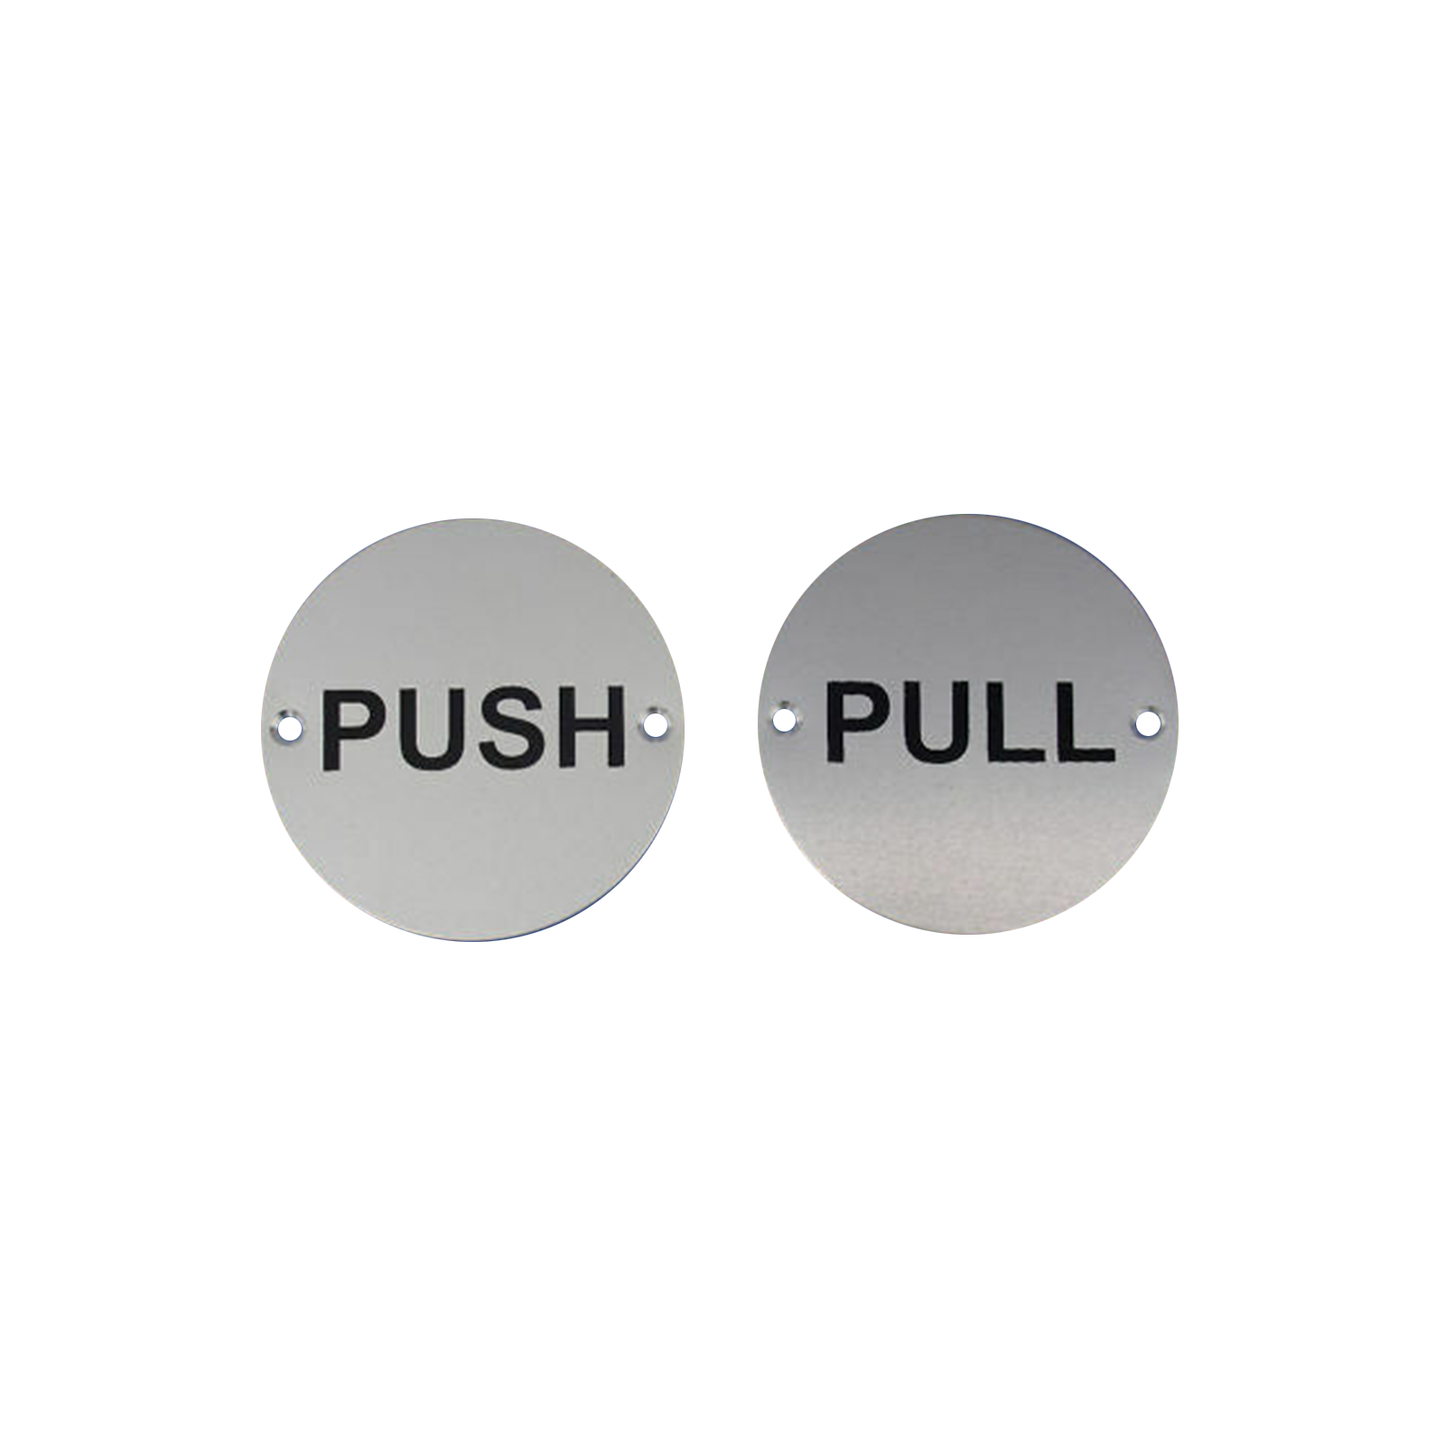 Satin Stainless Steel Push & Pull Door Sign 75mm 3"